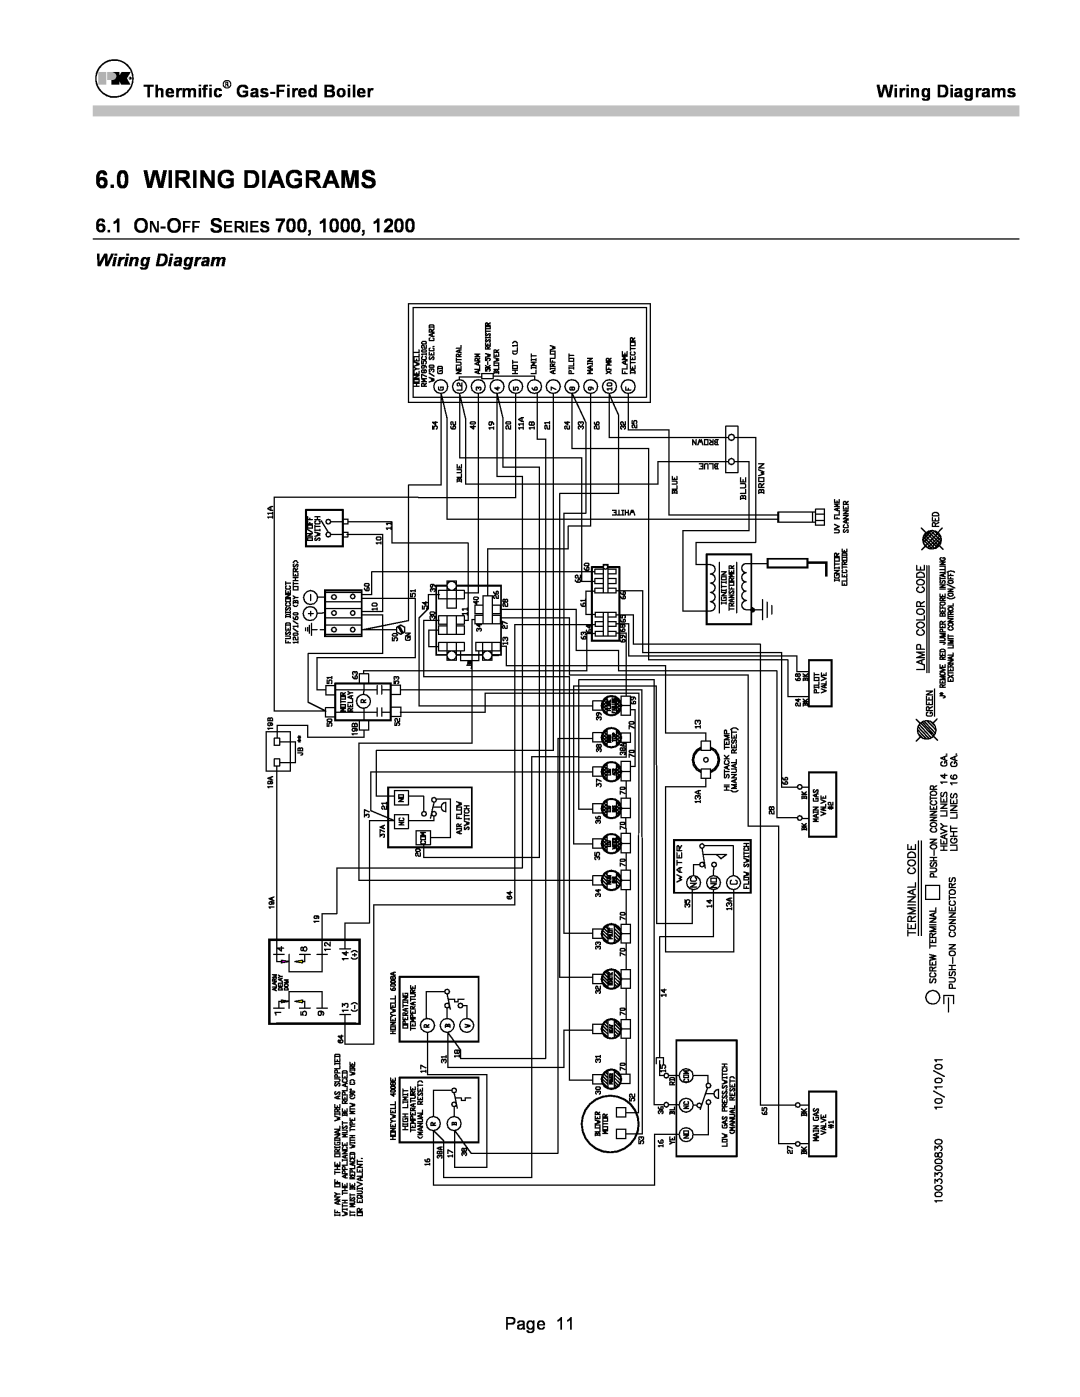 Patterson-Kelley DVSCM-02 owner manual 6.0WIRING DIAGRAMS, 6.1ON-OFF SERIES, Thermific Gas-FiredBoiler, Wiring Diagrams 